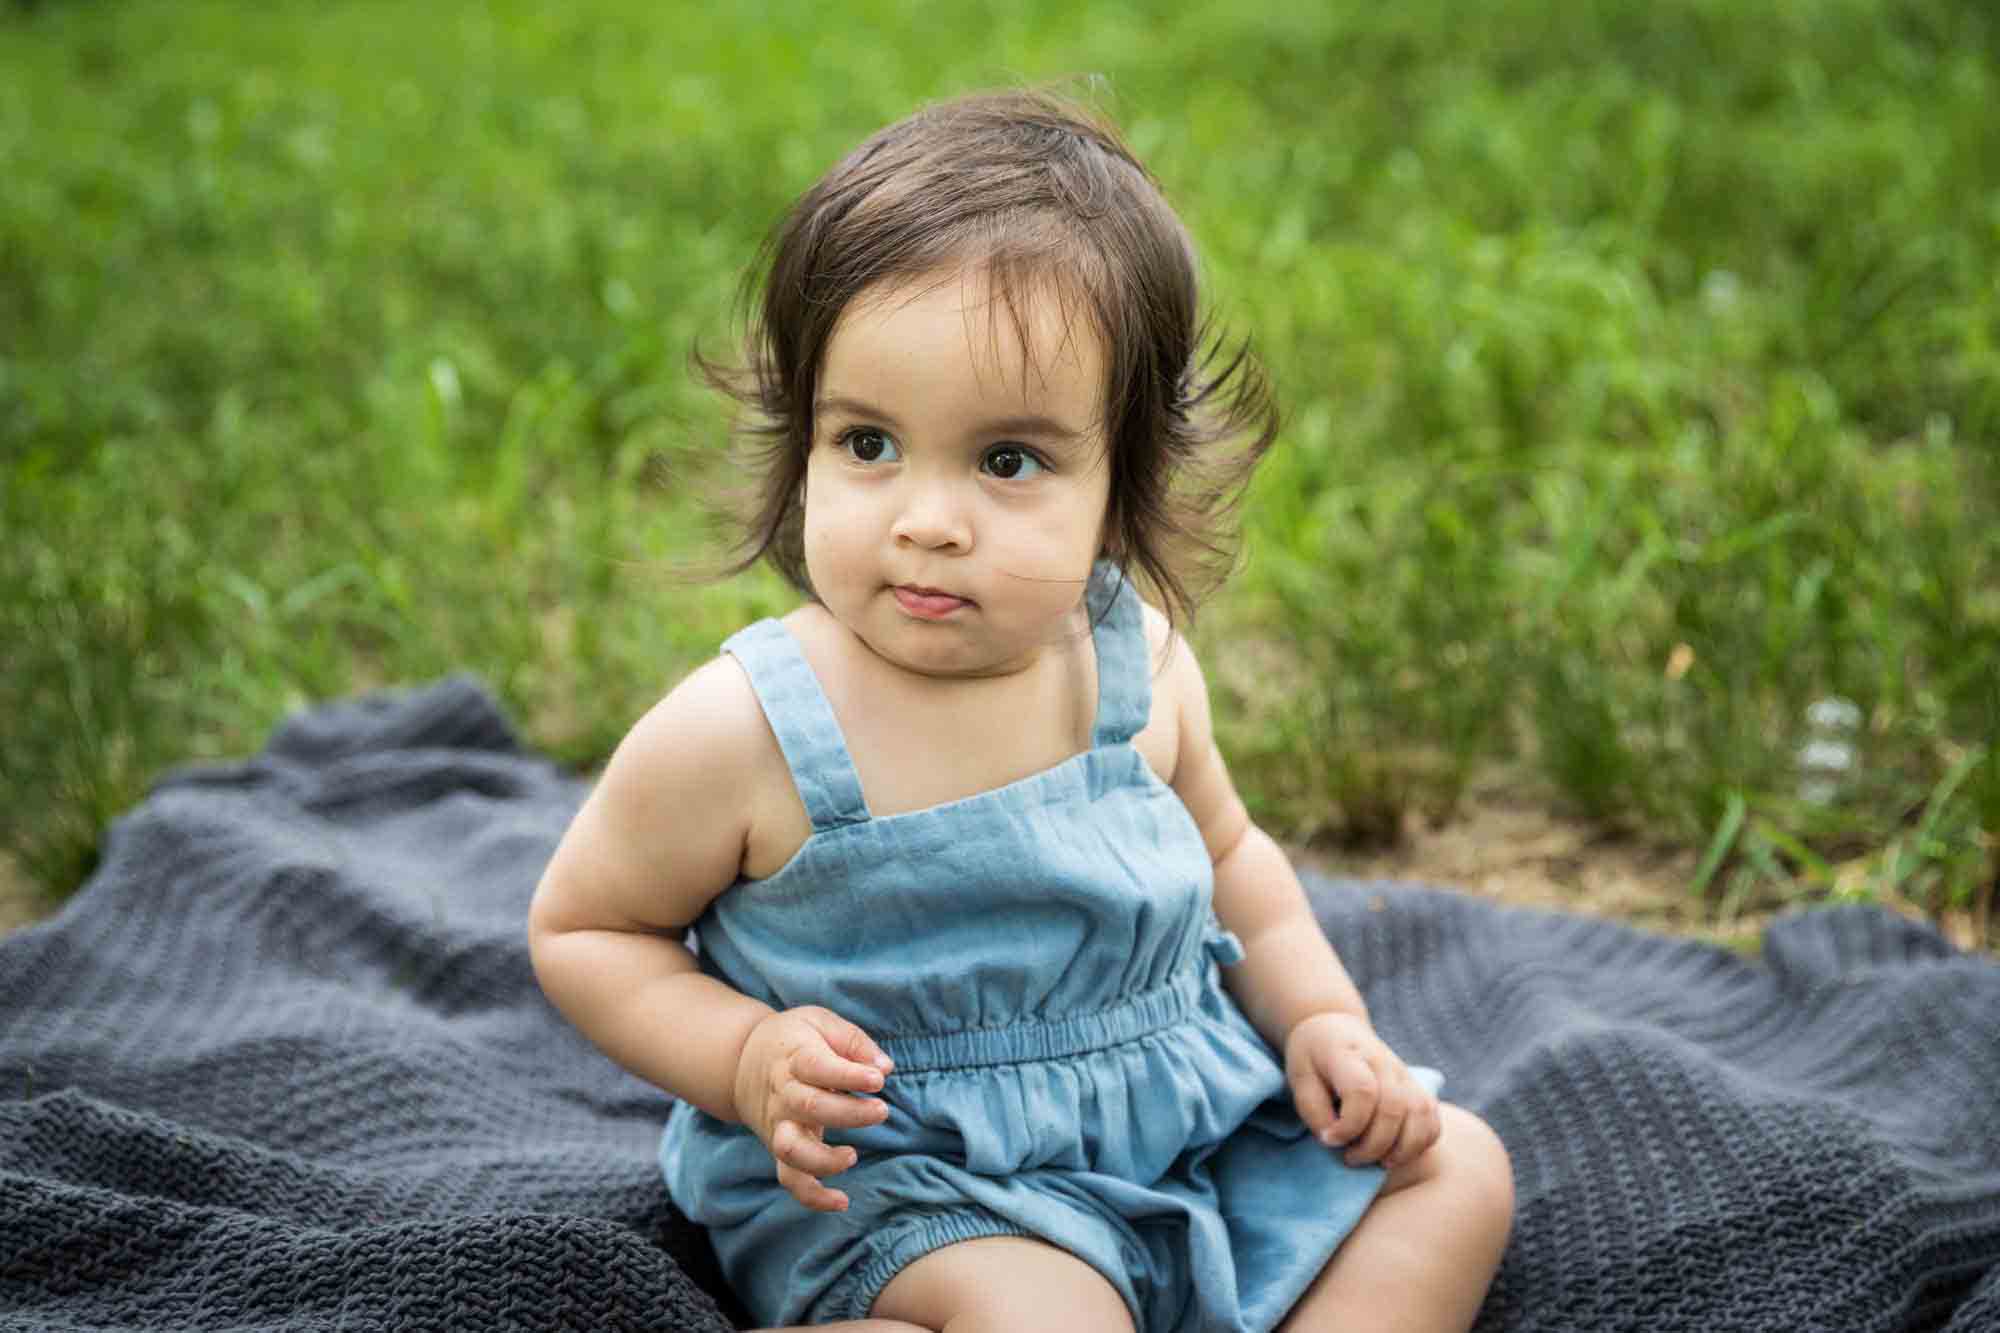 Baby girl wearing blue playsuit and sitting on gray blanket during a Fort Green Park family photo shoot